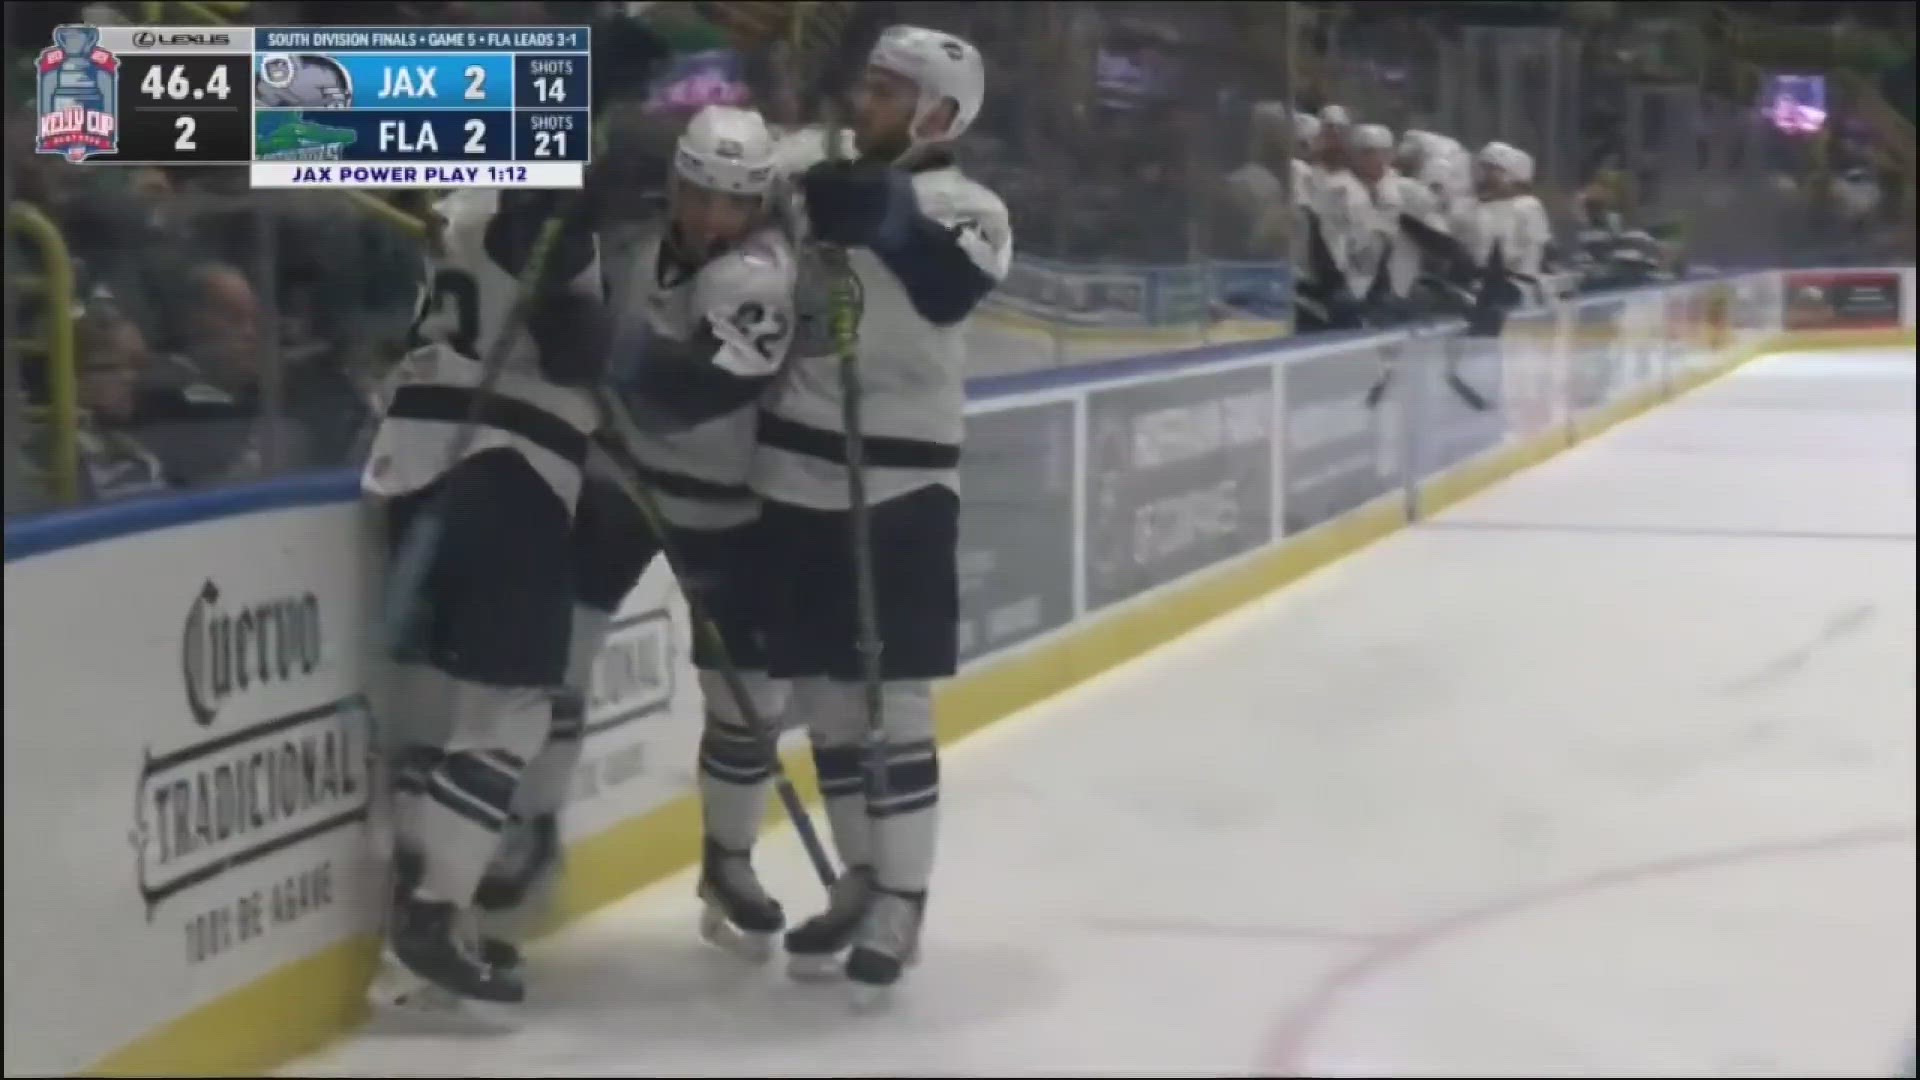 The Icemen were down 3-0 in the second round series against the Everblades before winning back-to-back games to extend the series to Game 6.